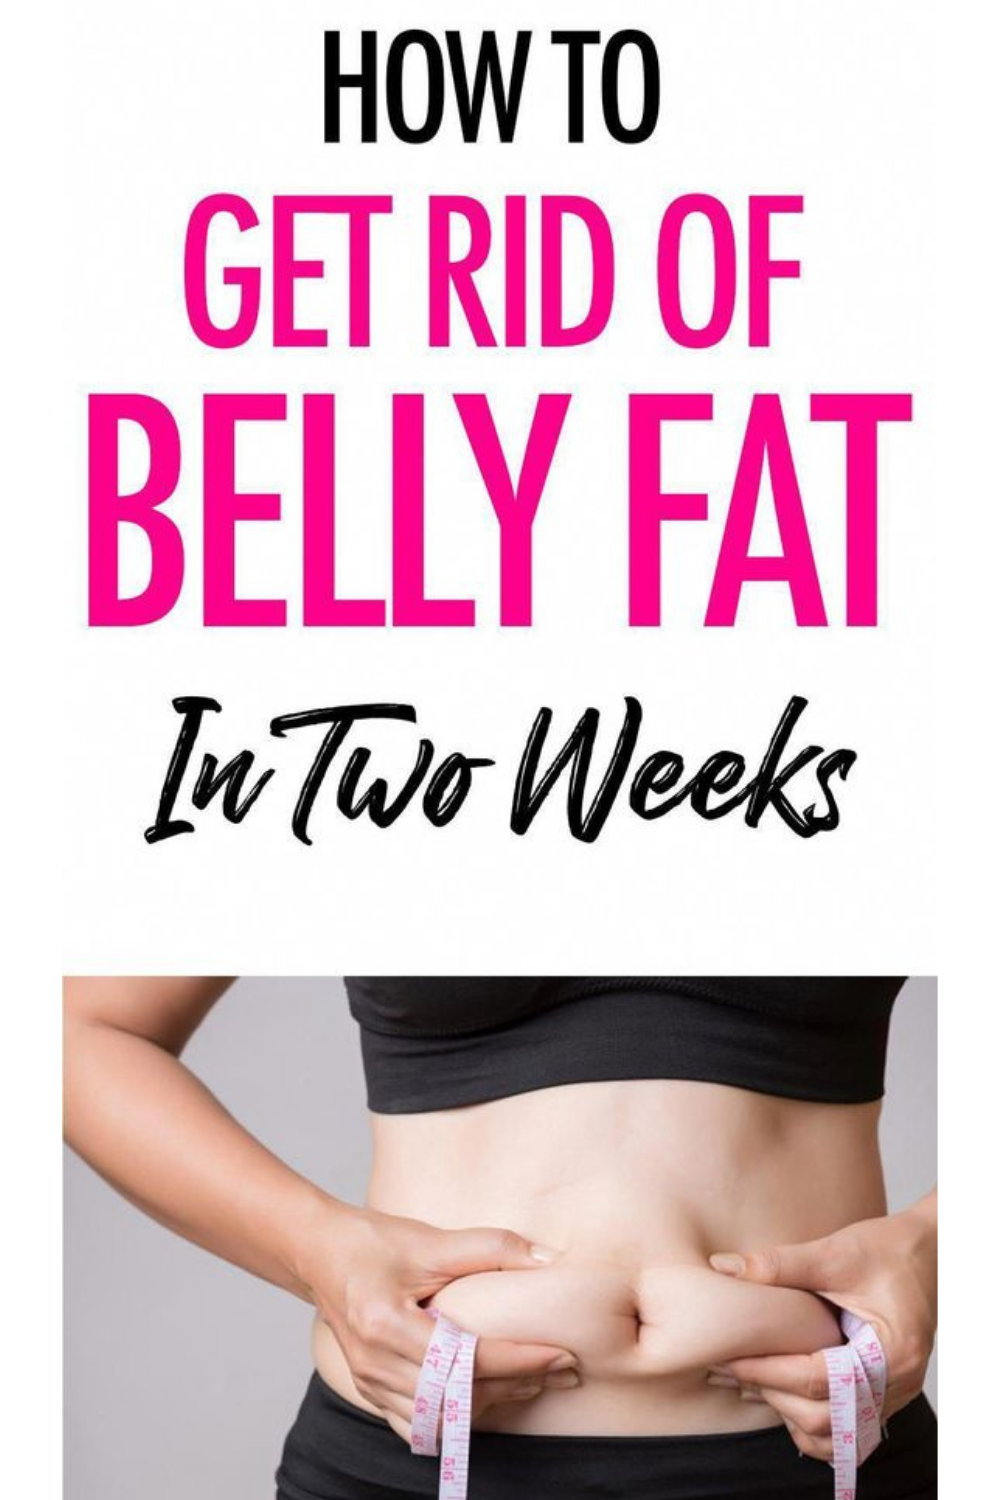 Pin on HOW TO GET RID OF BELLY FLAT IN TWO WEEKS